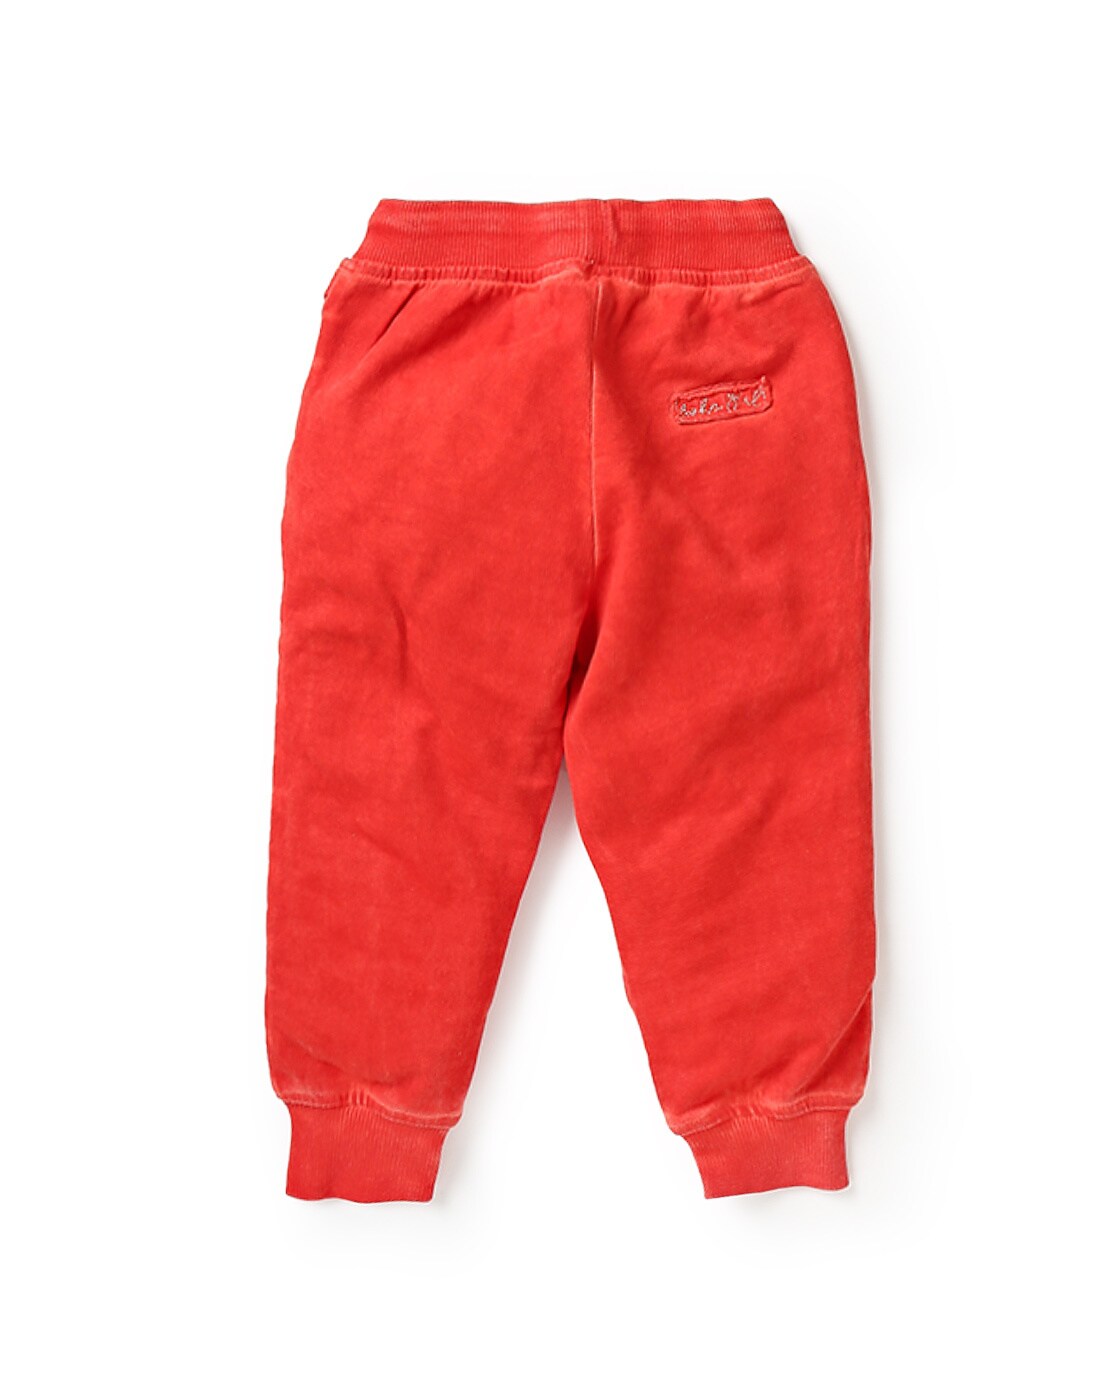 joggers for infants